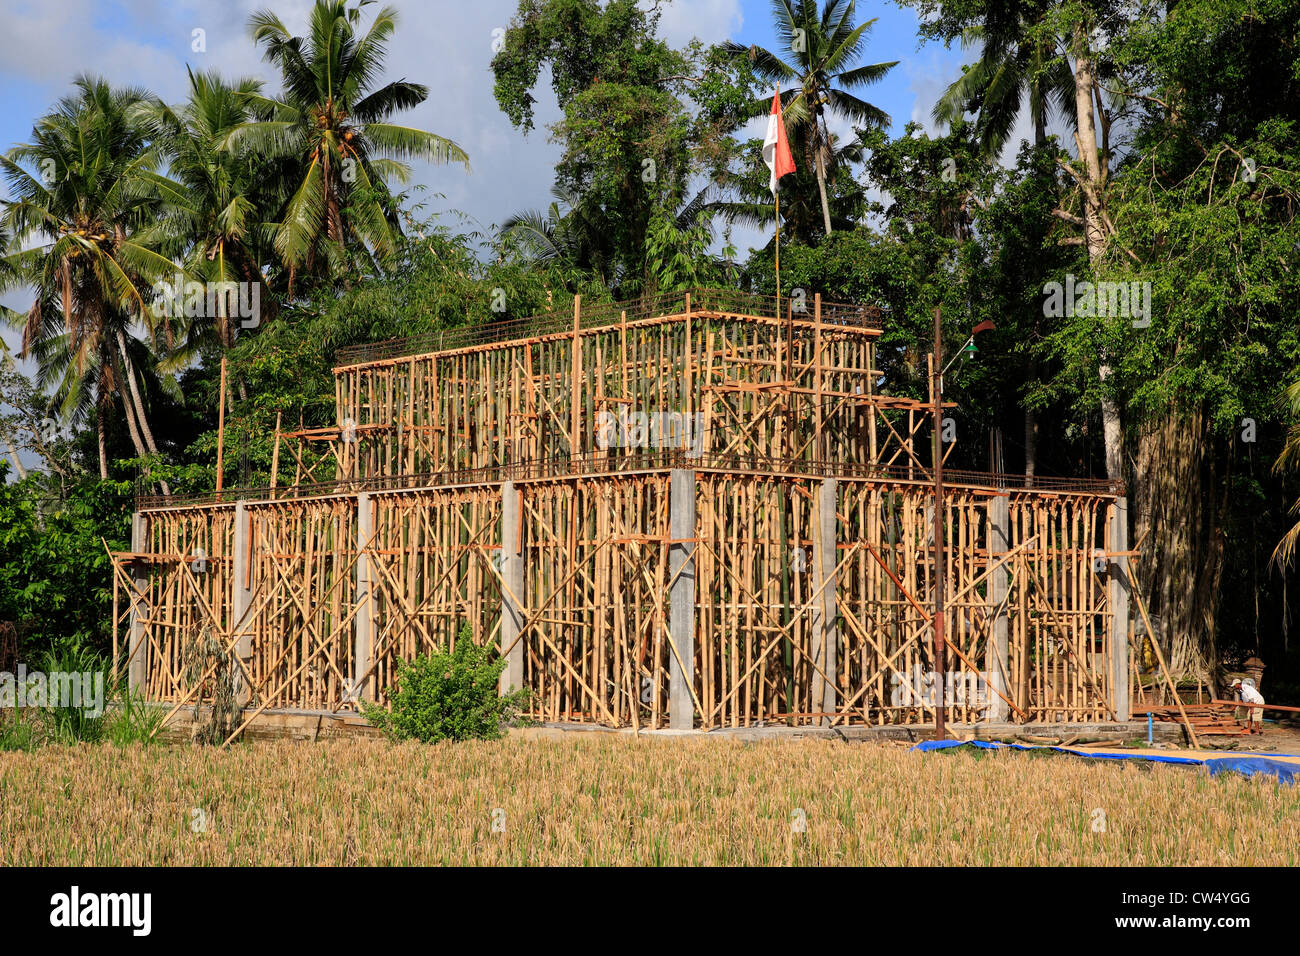 Bamboo Scaffolding being used for building. Near Ubud, Bali, Indonesia Stock Photo